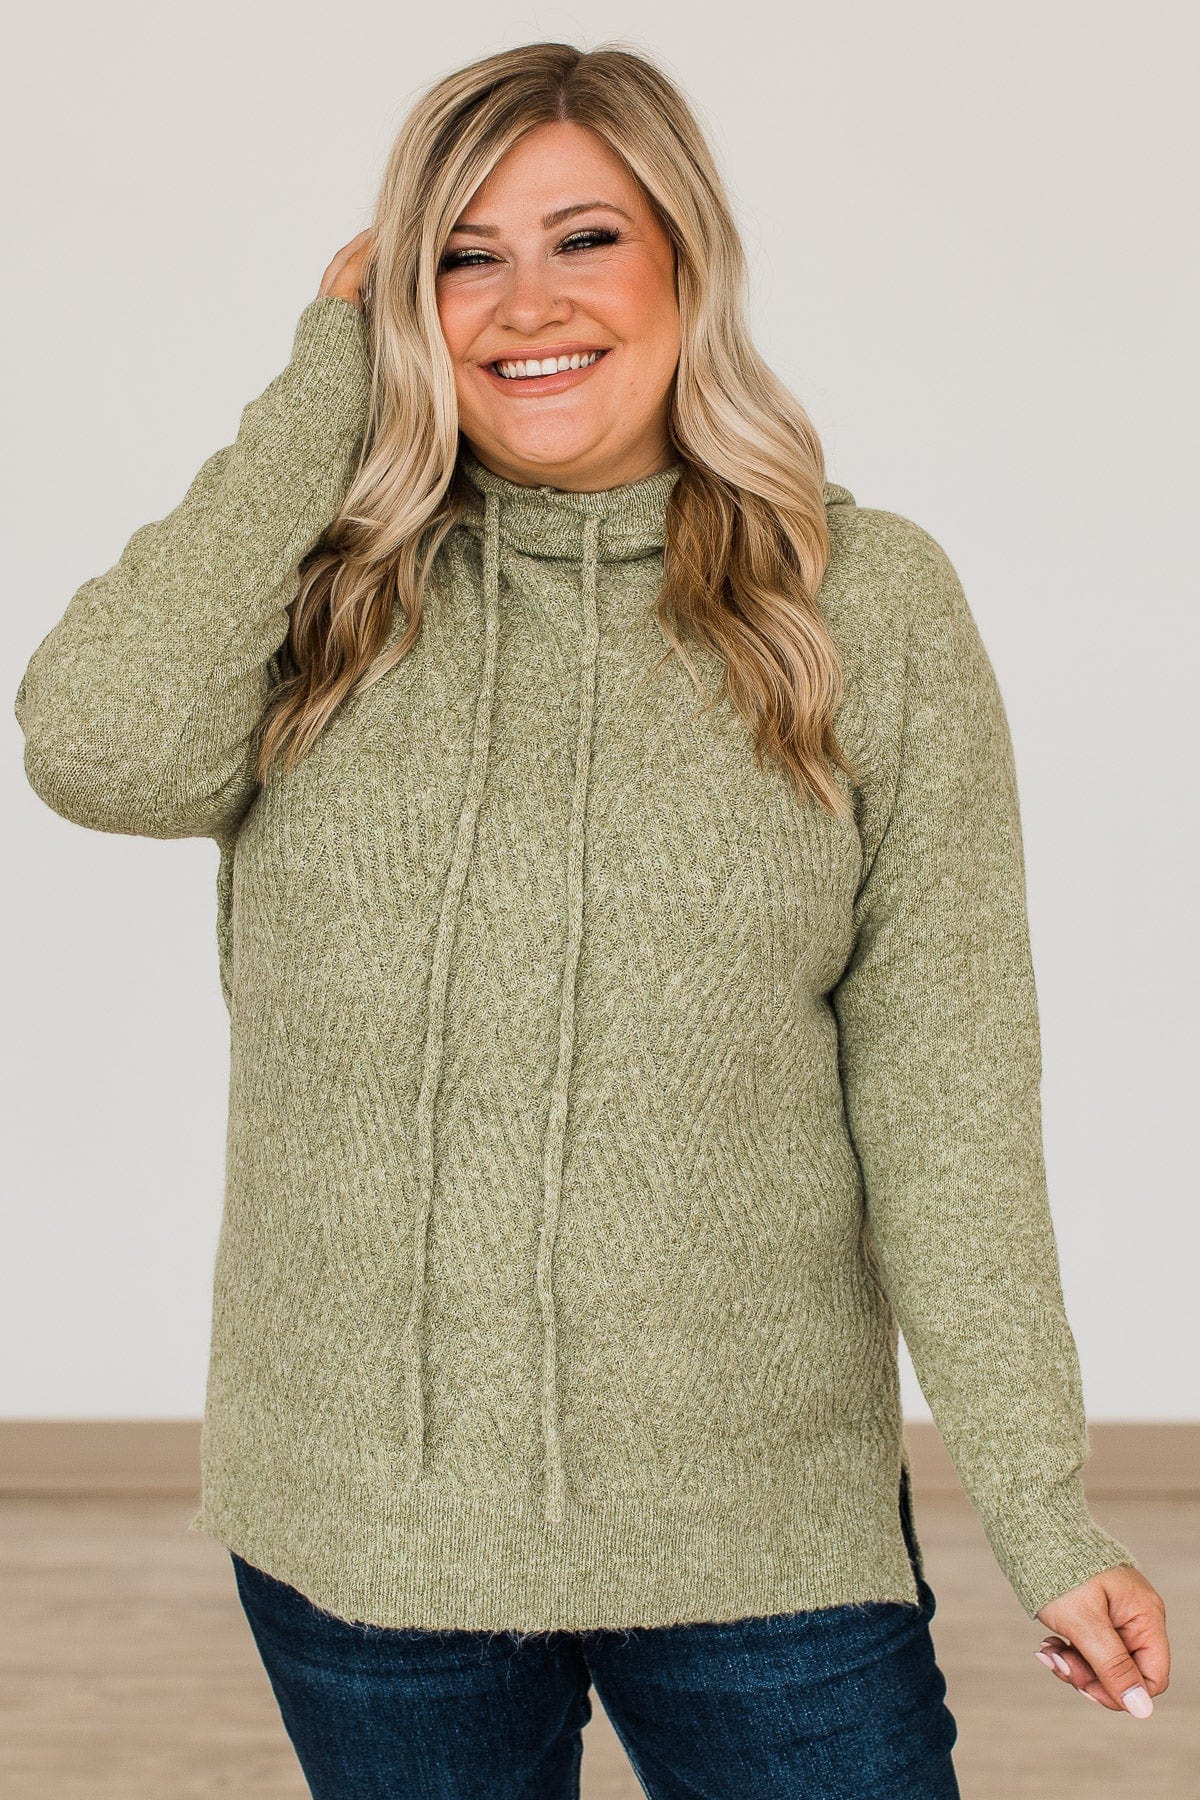 Make Today Great Hooded Sweater- Olive